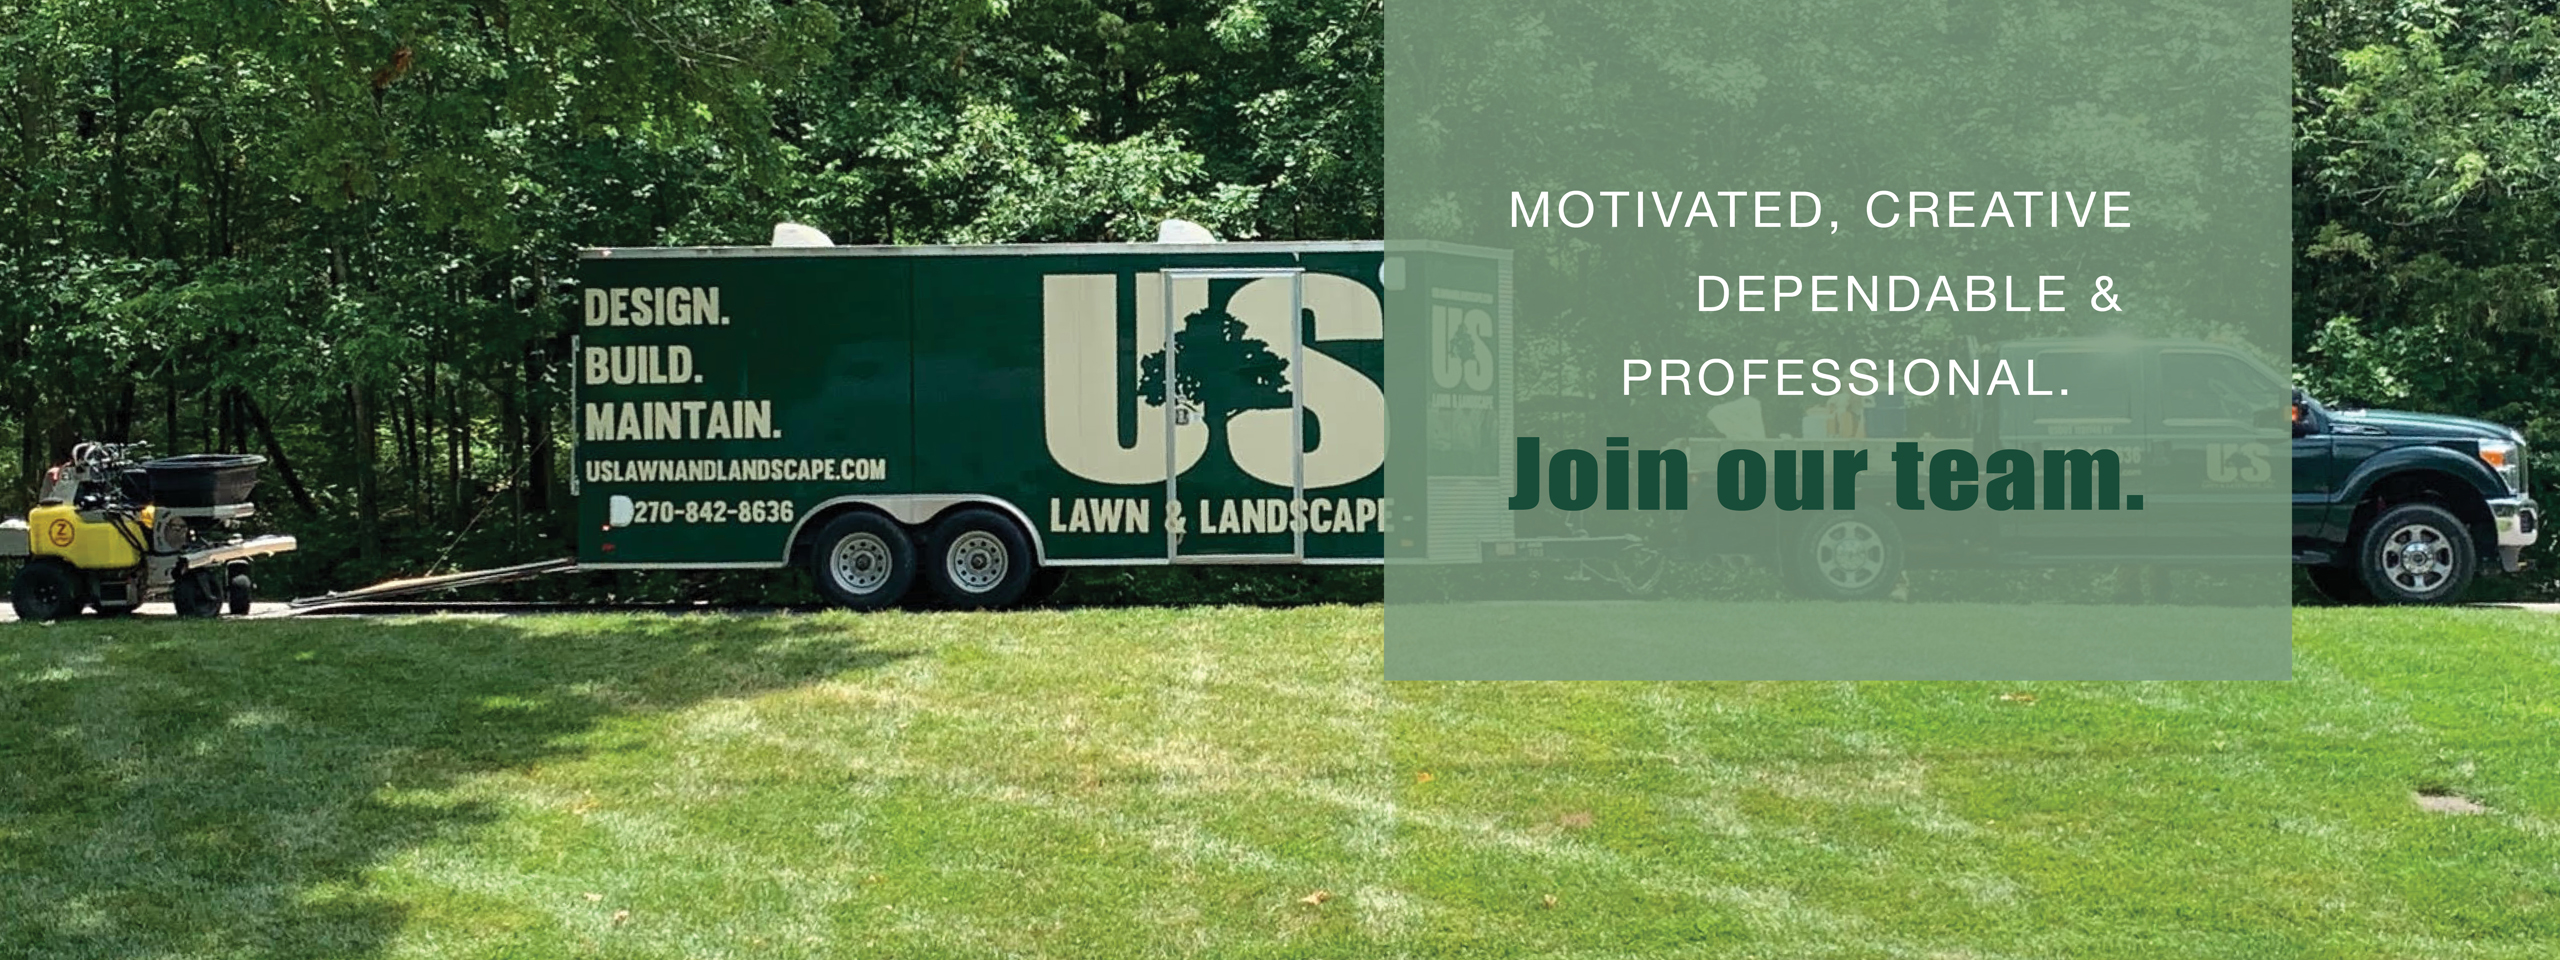 US Lawn and Landscape Job Opportunities